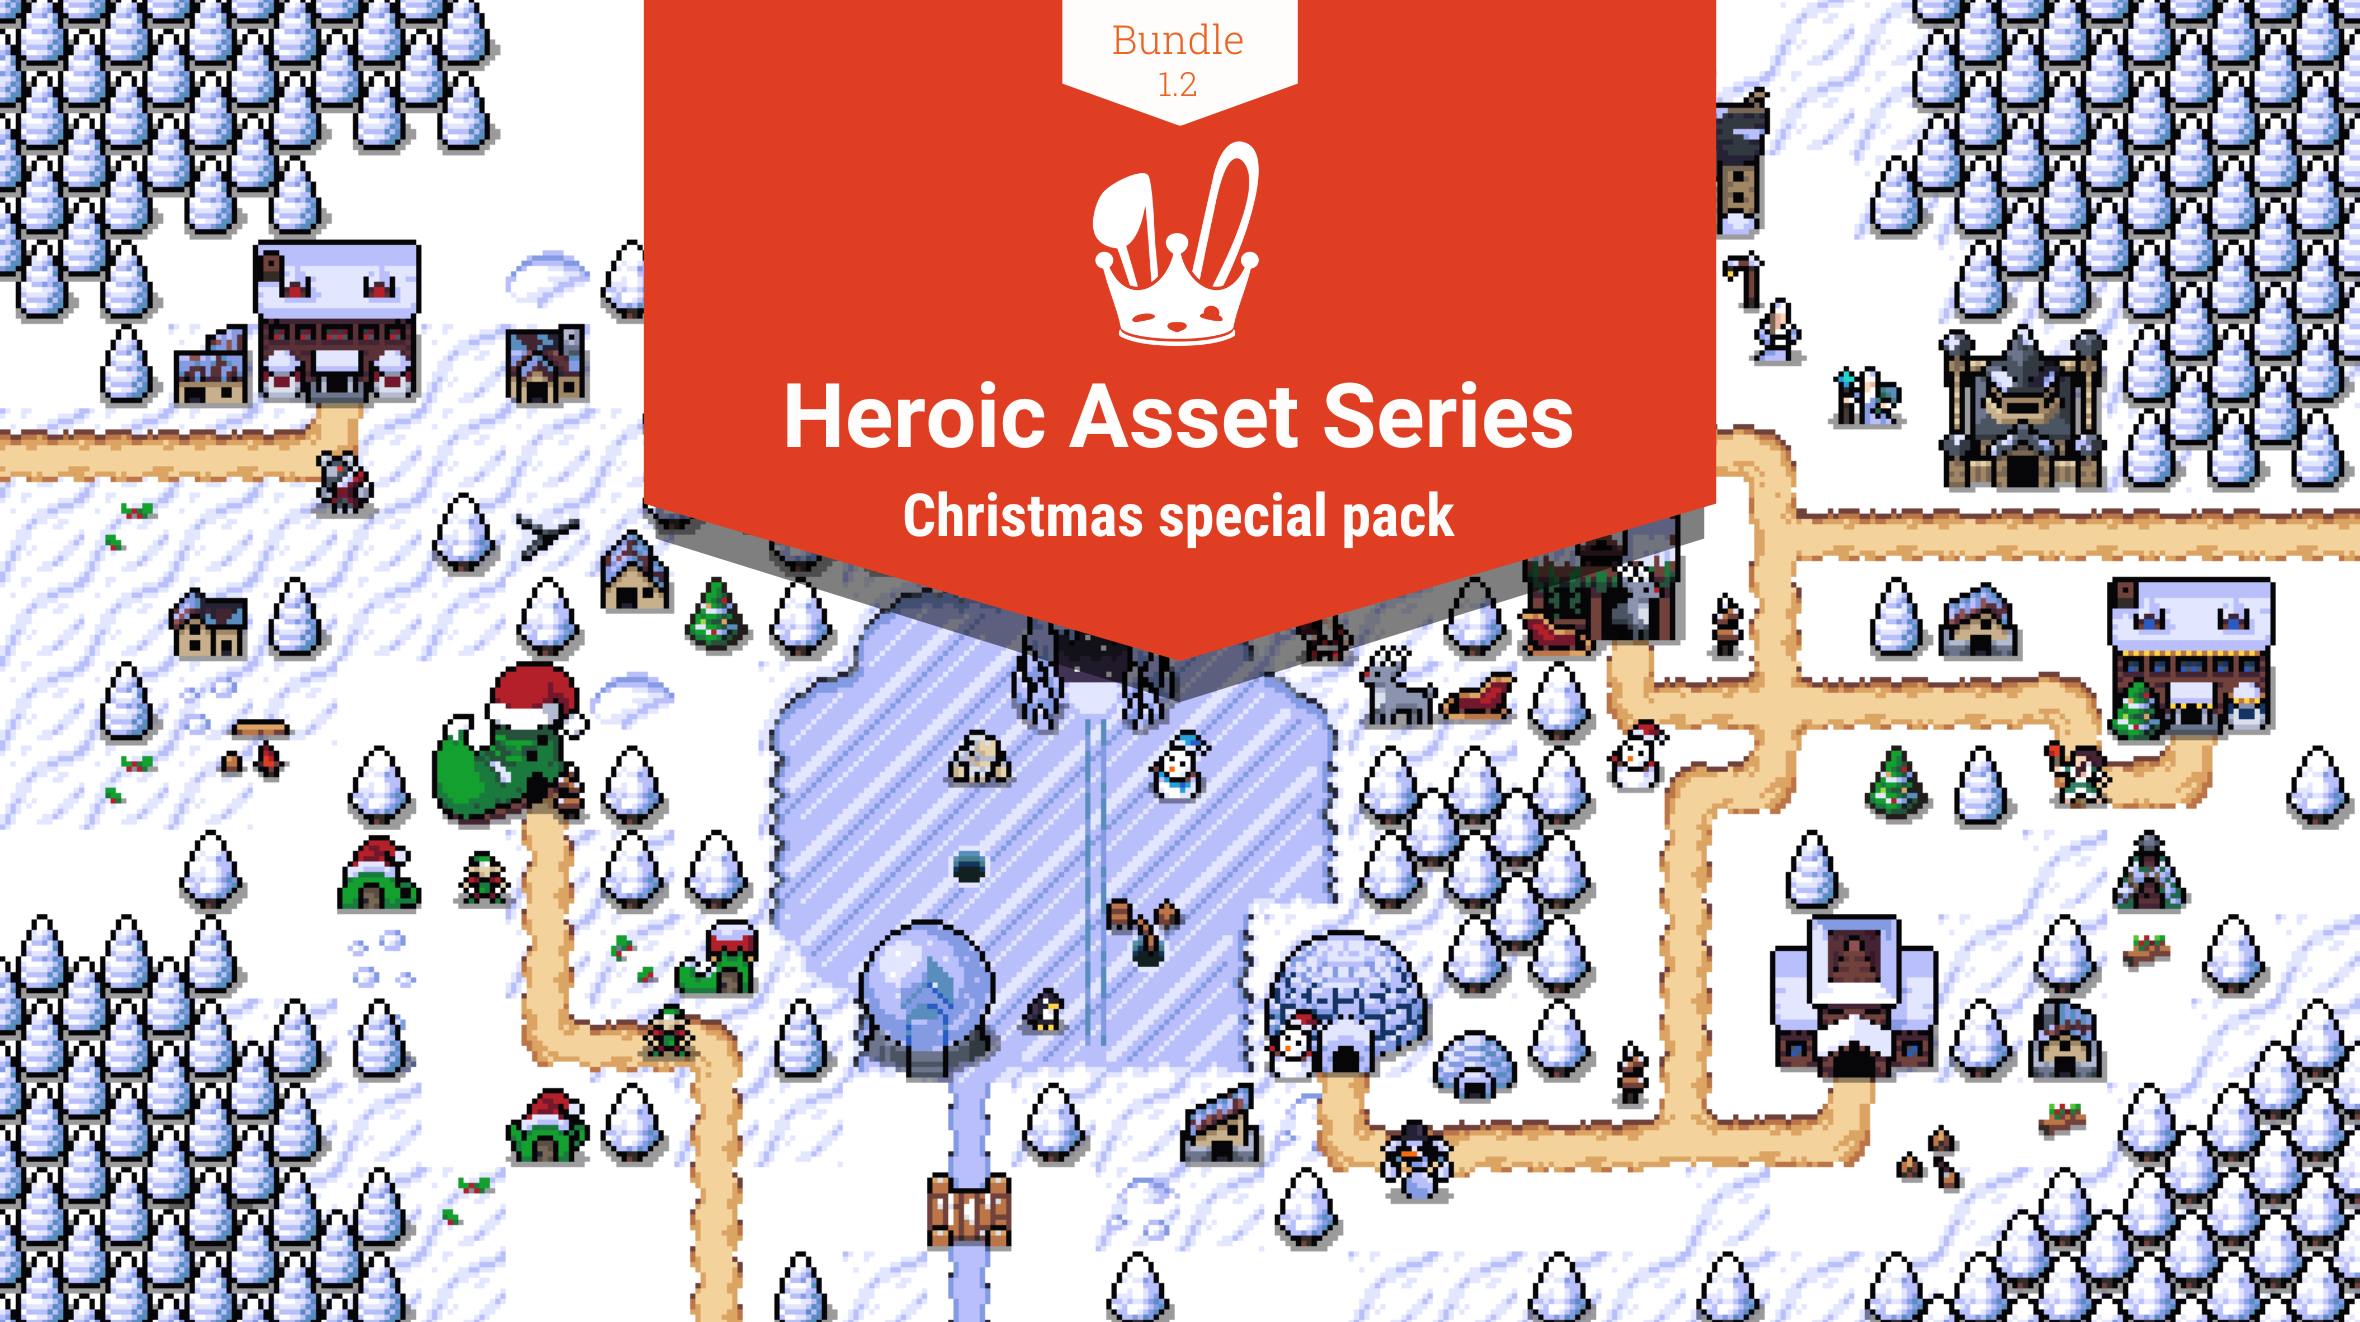 Heroic Asset Series: Christmas special pack